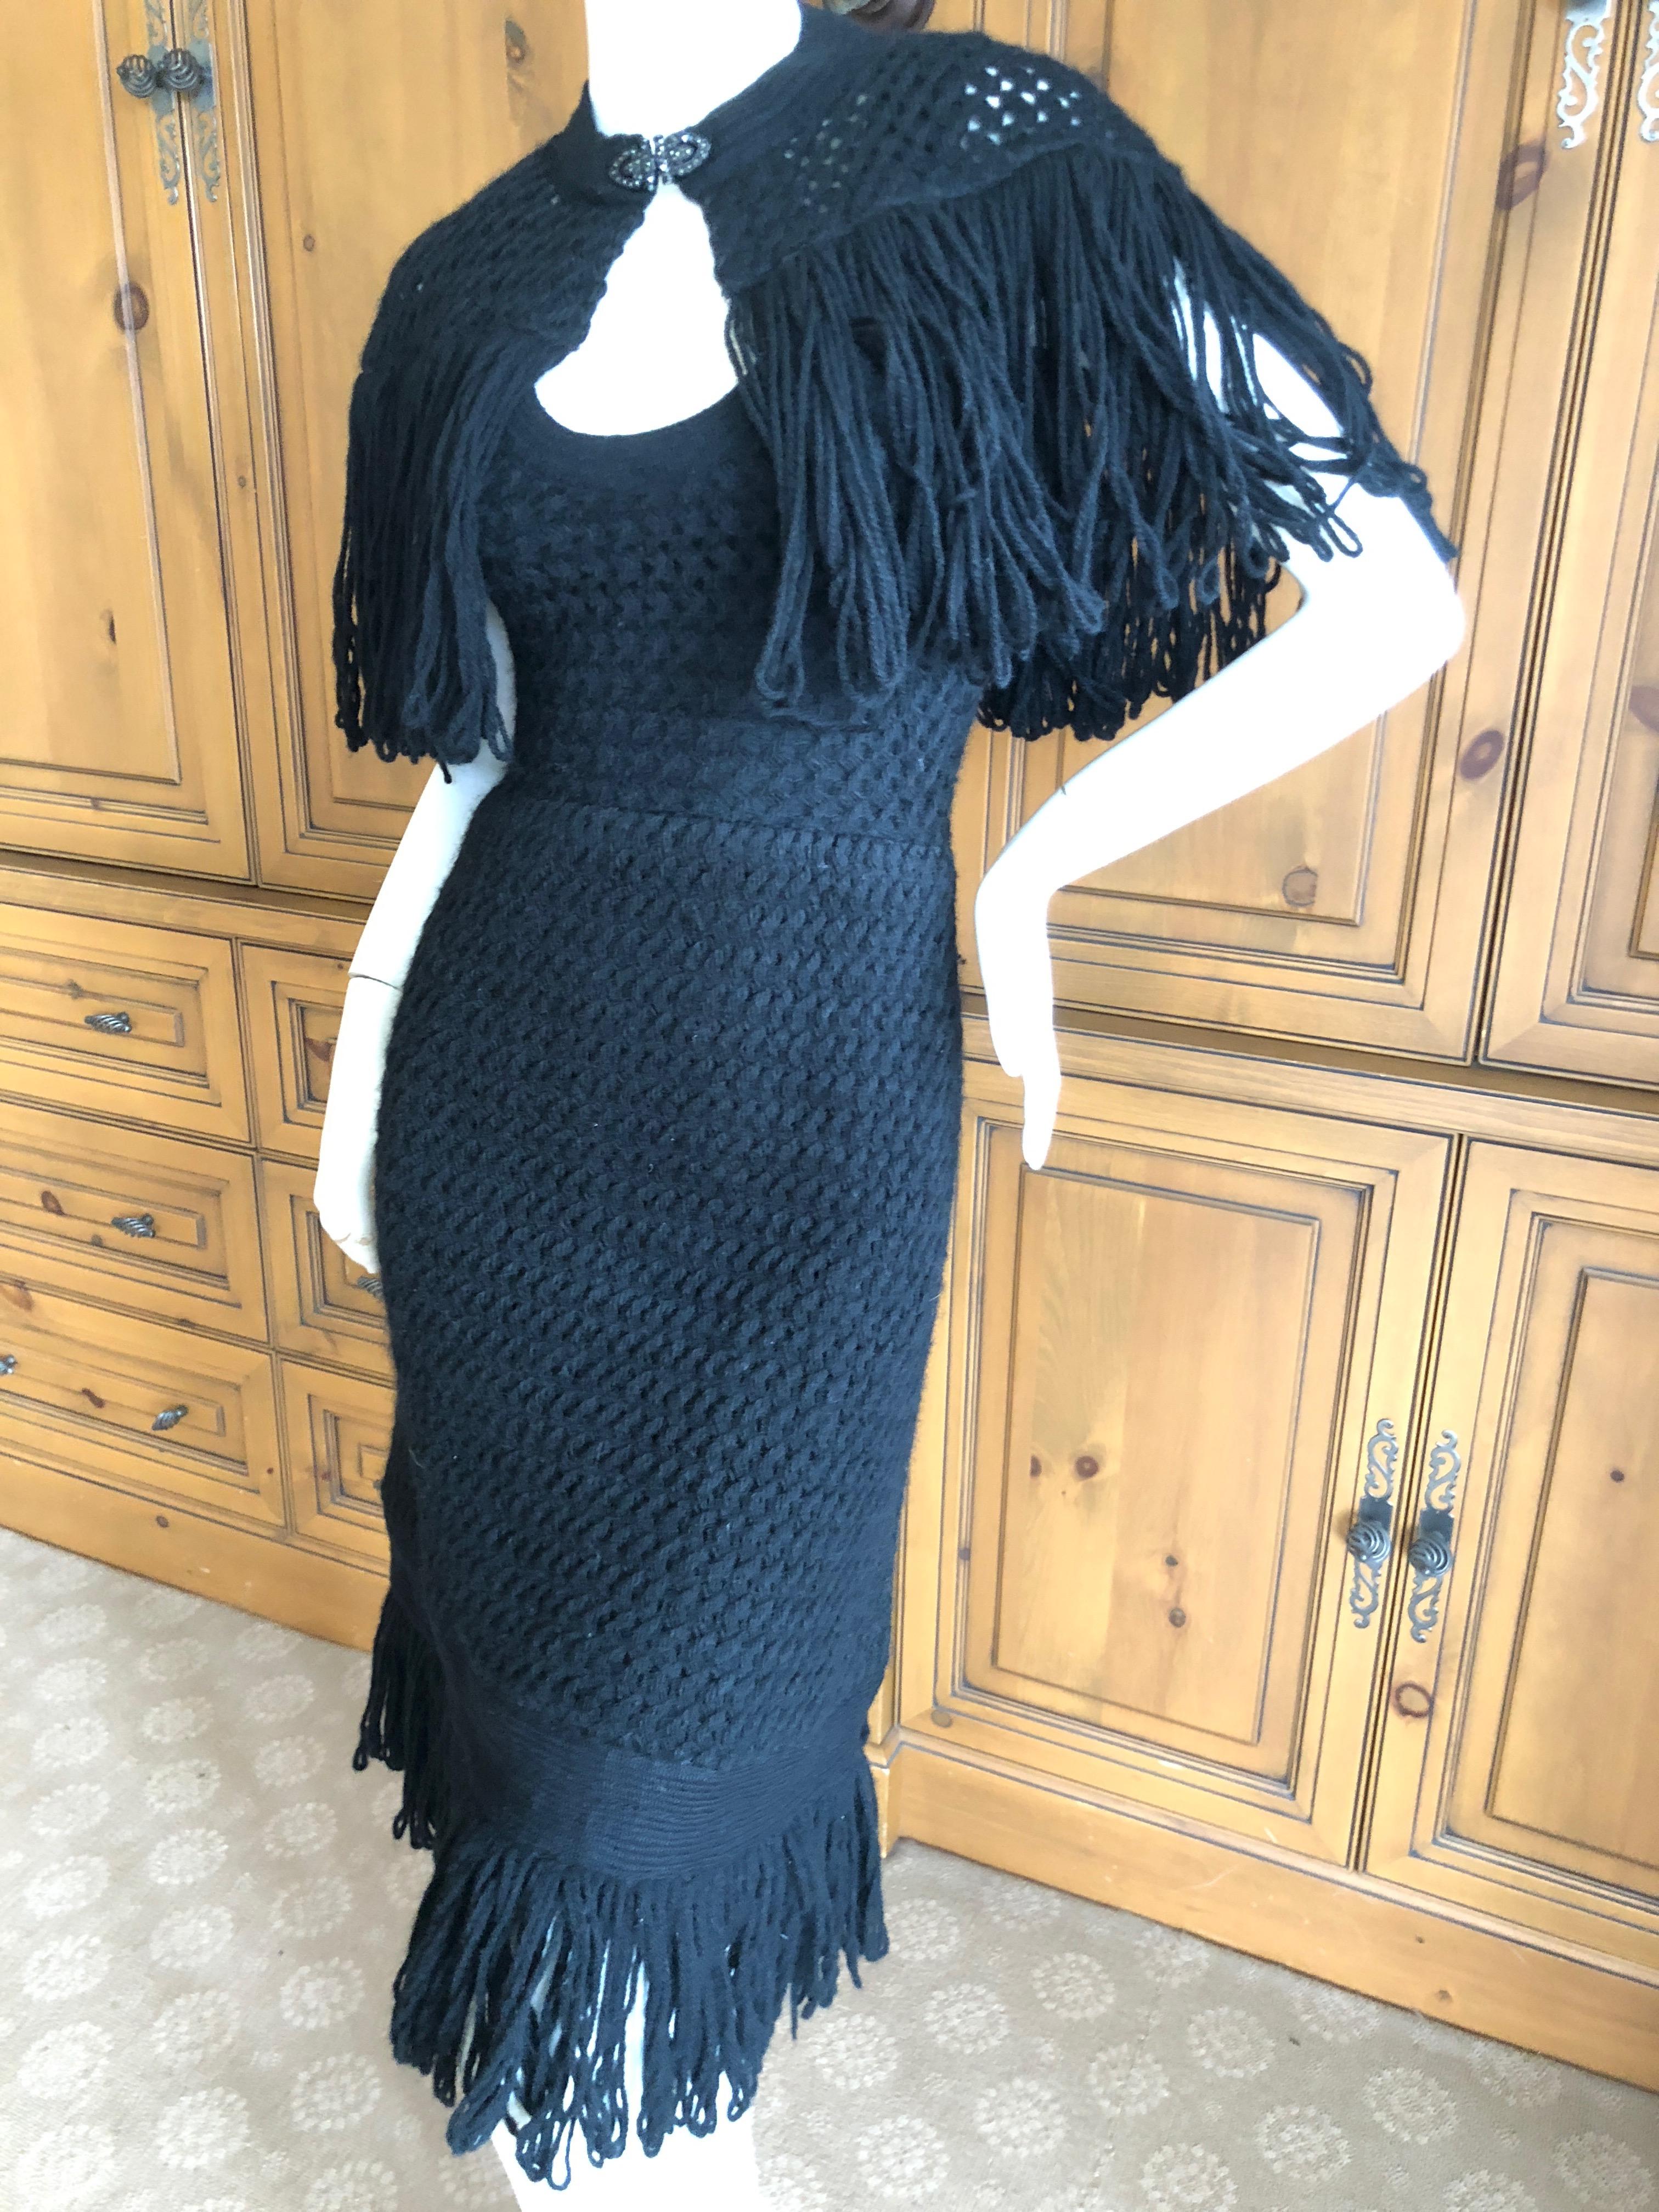 Cardinali Black Silk Lined Crochet Dress with Matching Fringed Shawl Fall 1971  For Sale 3